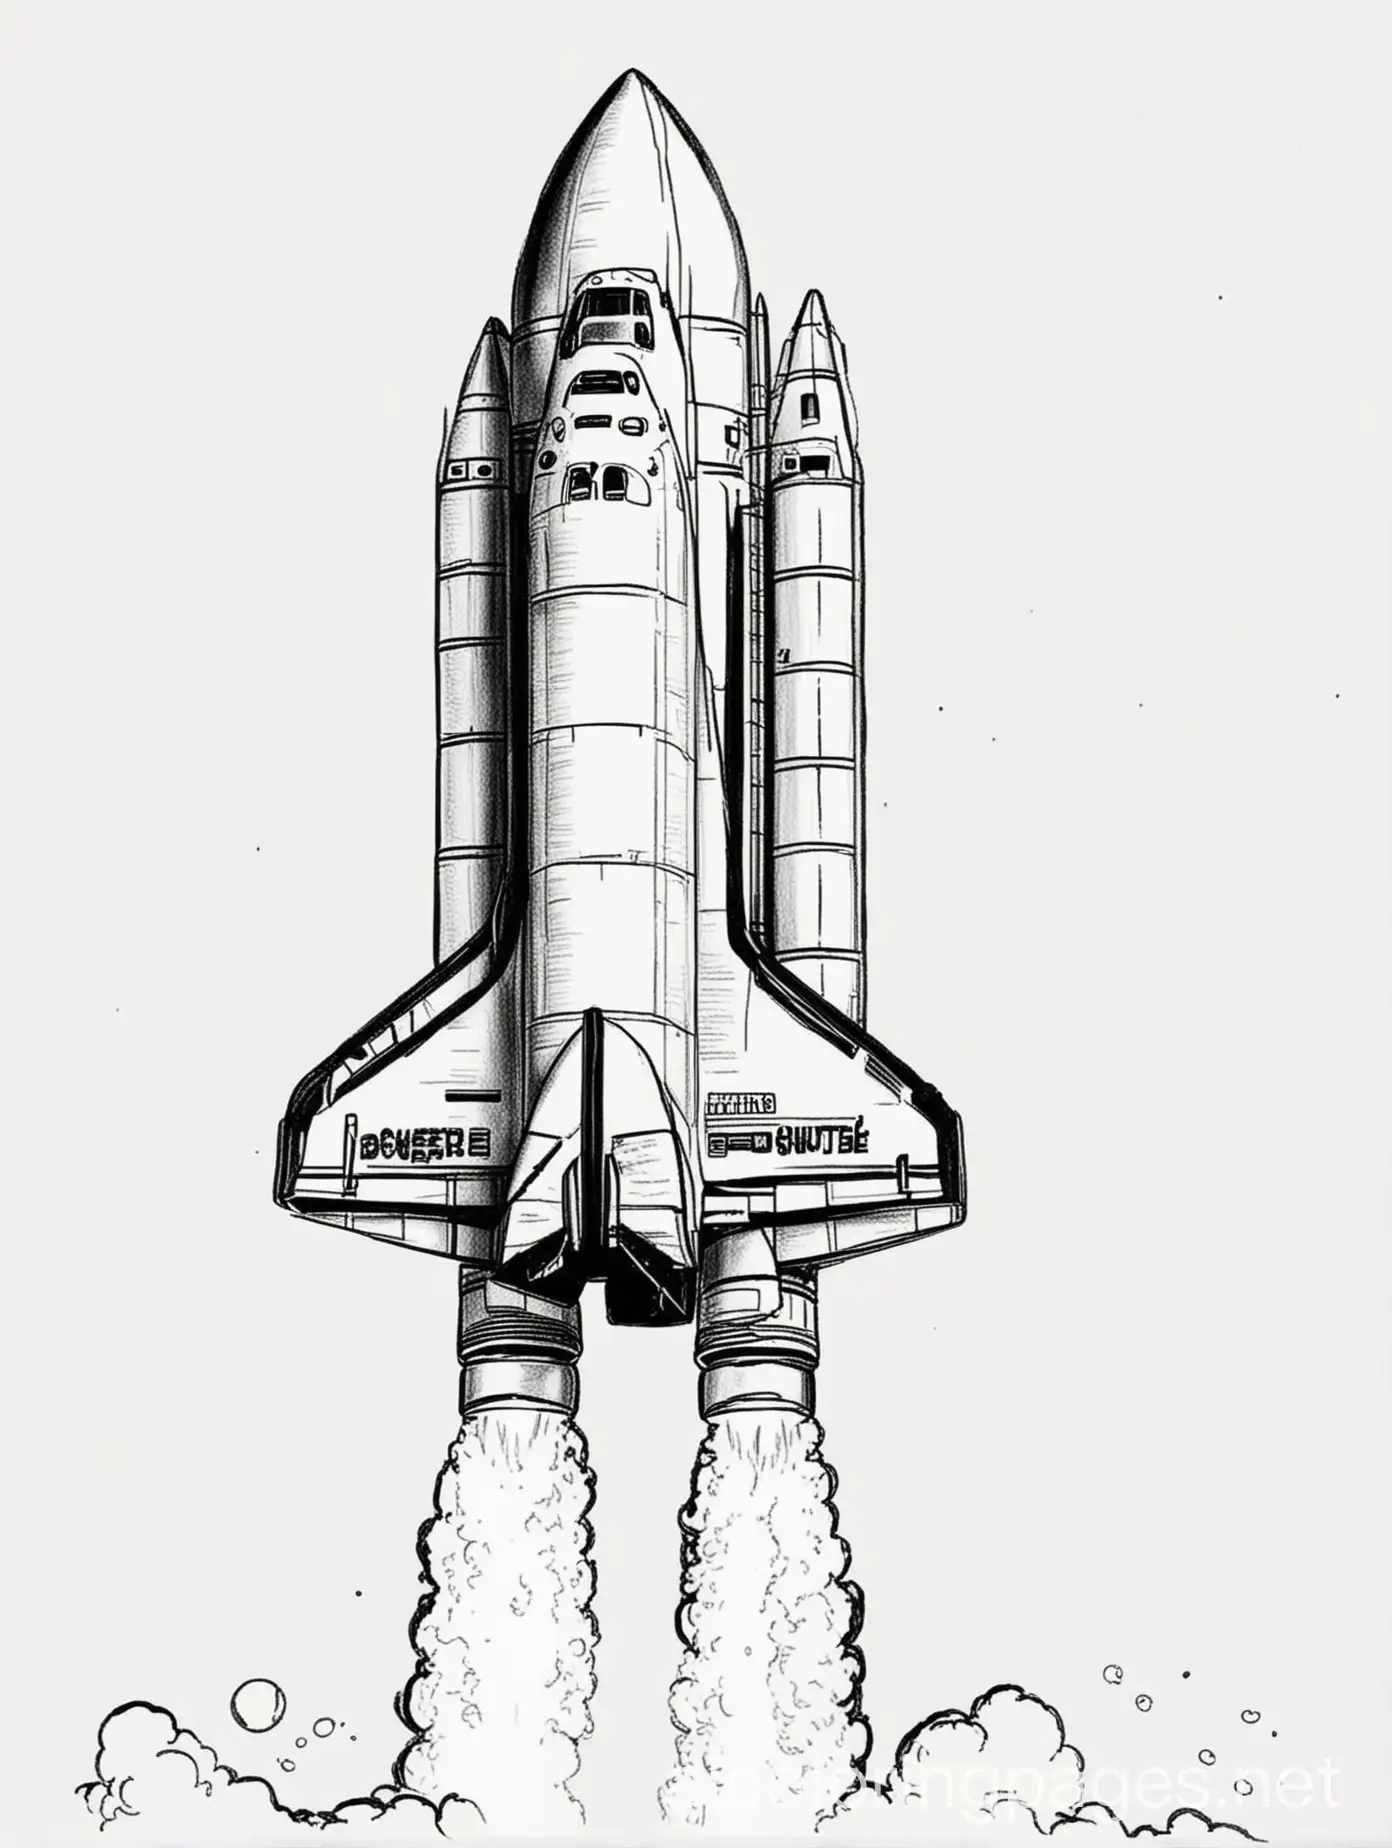 A space shuttle launching into orbit from a space center, coloring page, black and white, line art, white background, Simplicity, Ample White Space. The background of the coloring page is plain white to make it easier for children to color within the lines. The outlines of all the subjects are easy to distinguish, making it simple for kids to color., Coloring Page, black and white, line art, white background, Simplicity, Ample White Space. The background of the coloring page is plain white to make it easy for young children to color within the lines. The outlines of all the subjects are easy to distinguish, making it simple for kids to color without too much difficulty